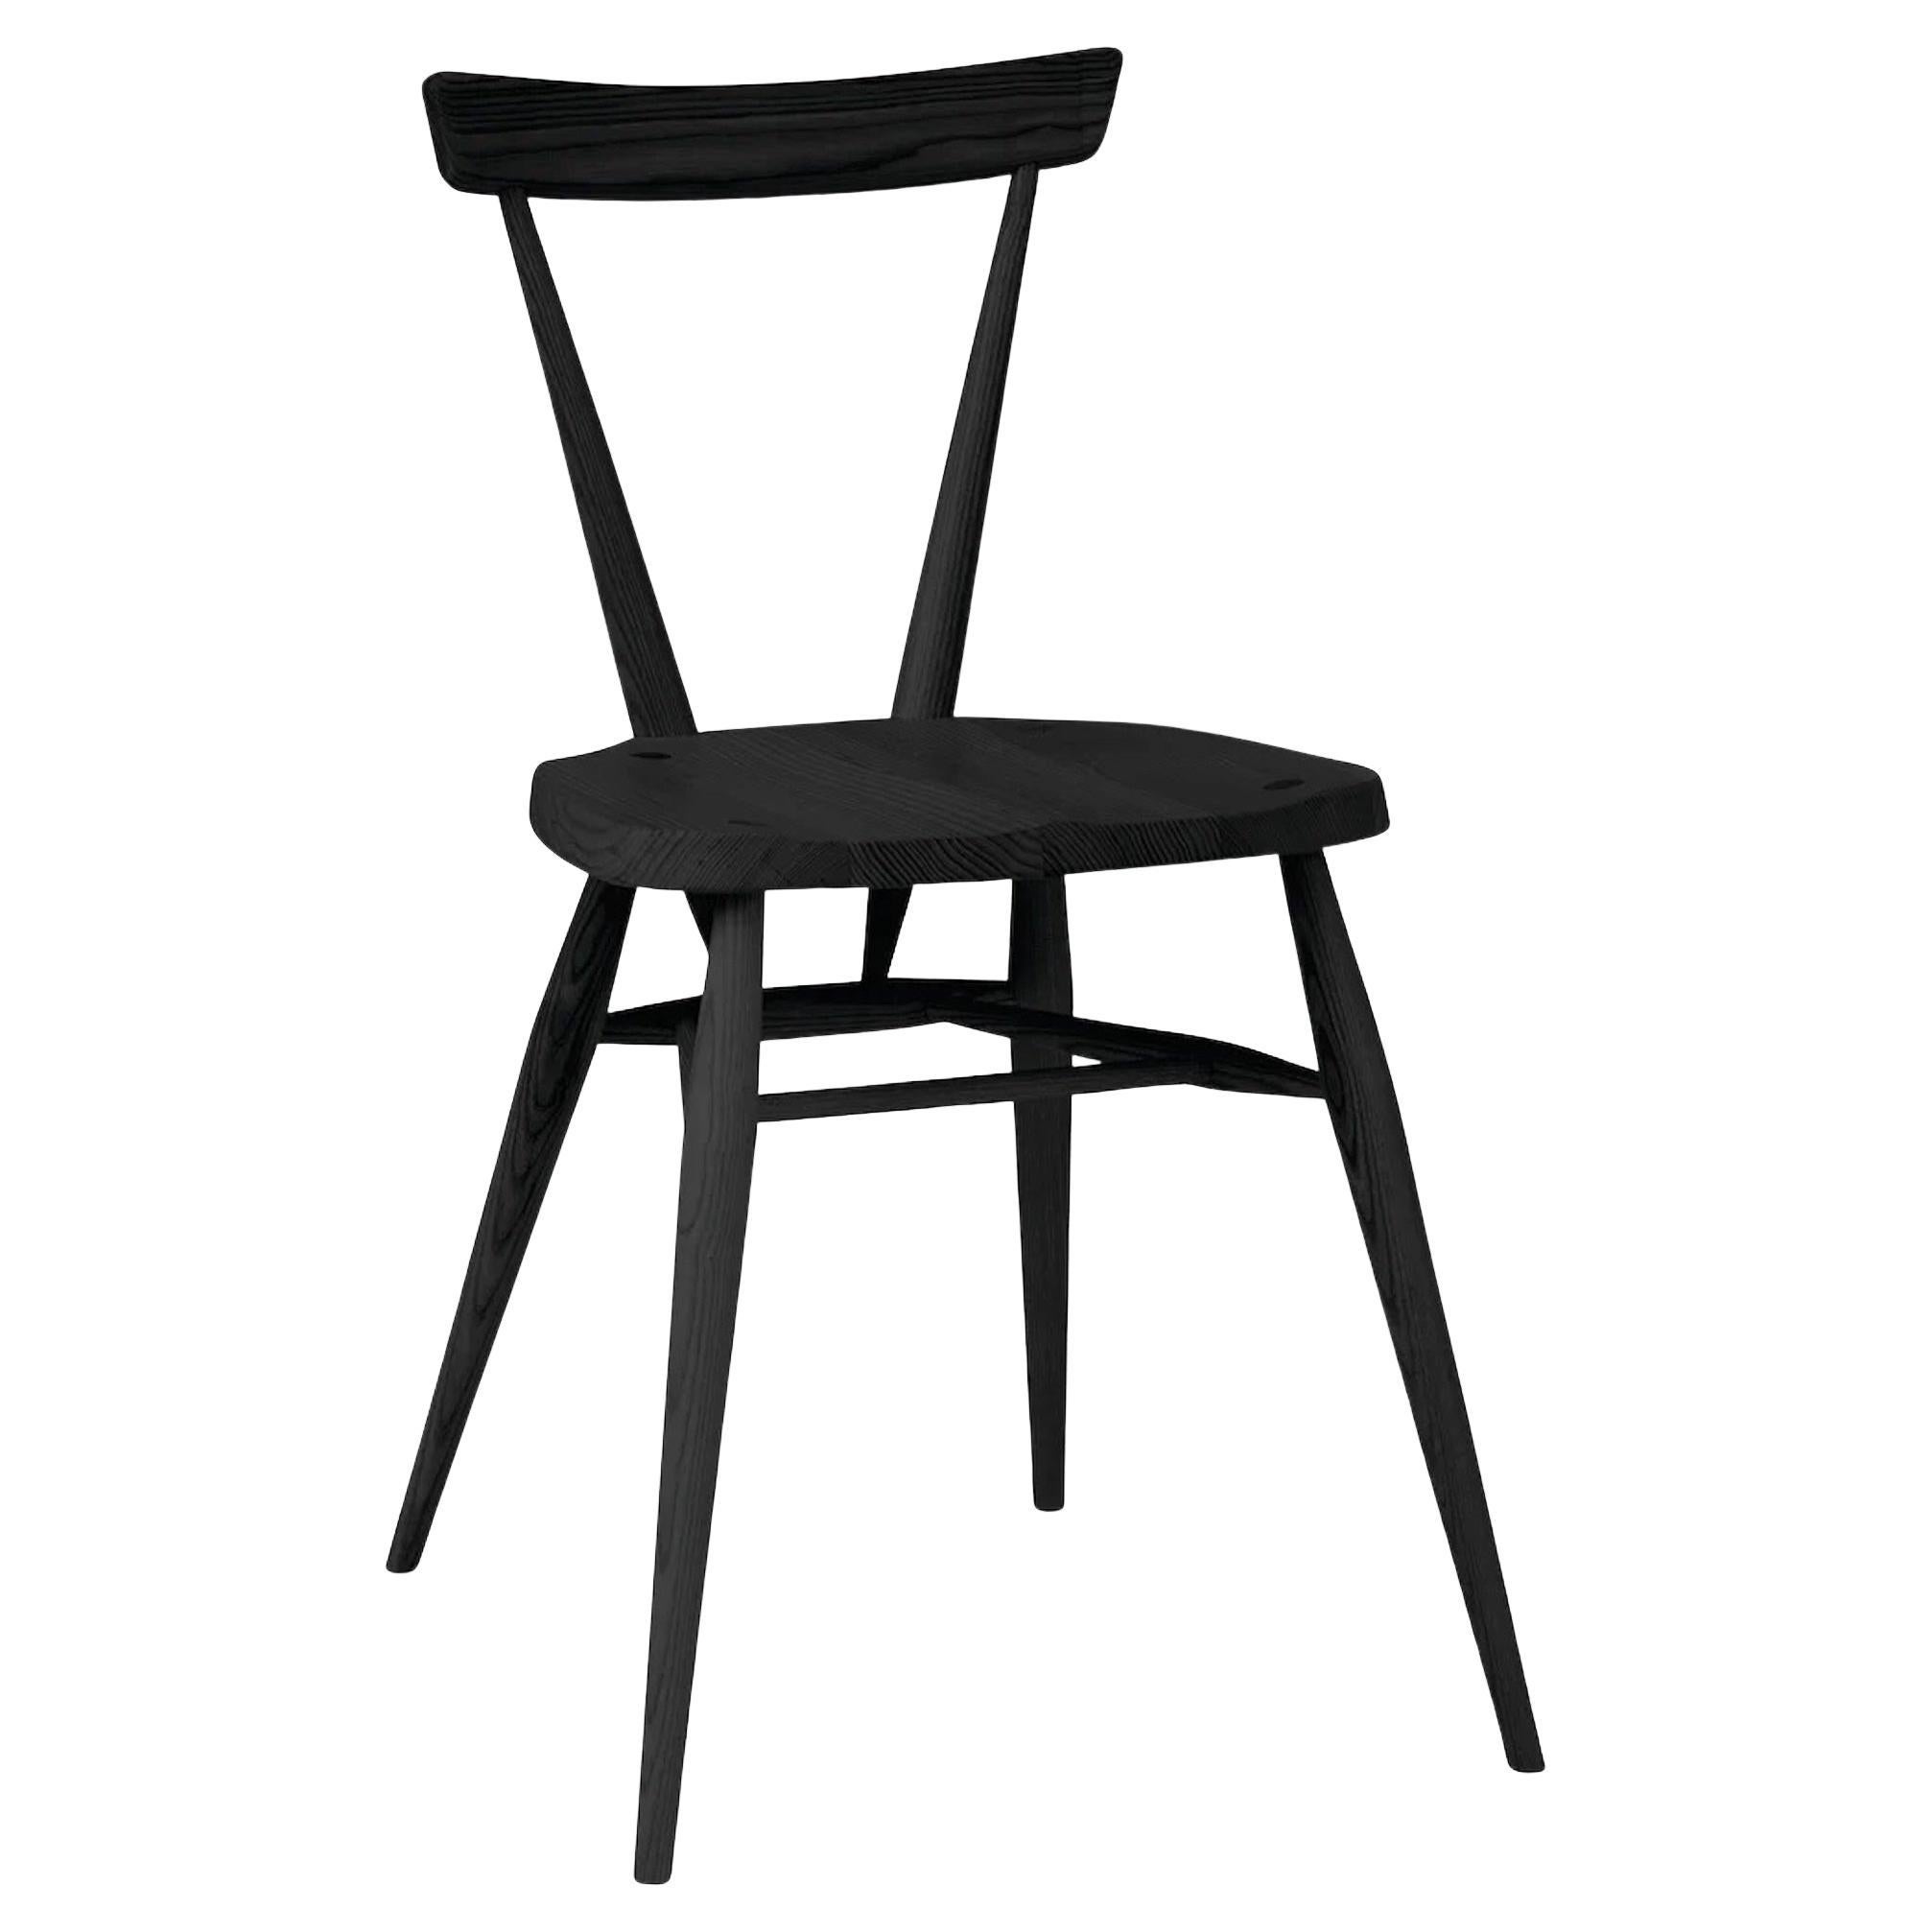 L.Ercolani Stacking Black Chair Designed by Lucian R Ercolani in Stock